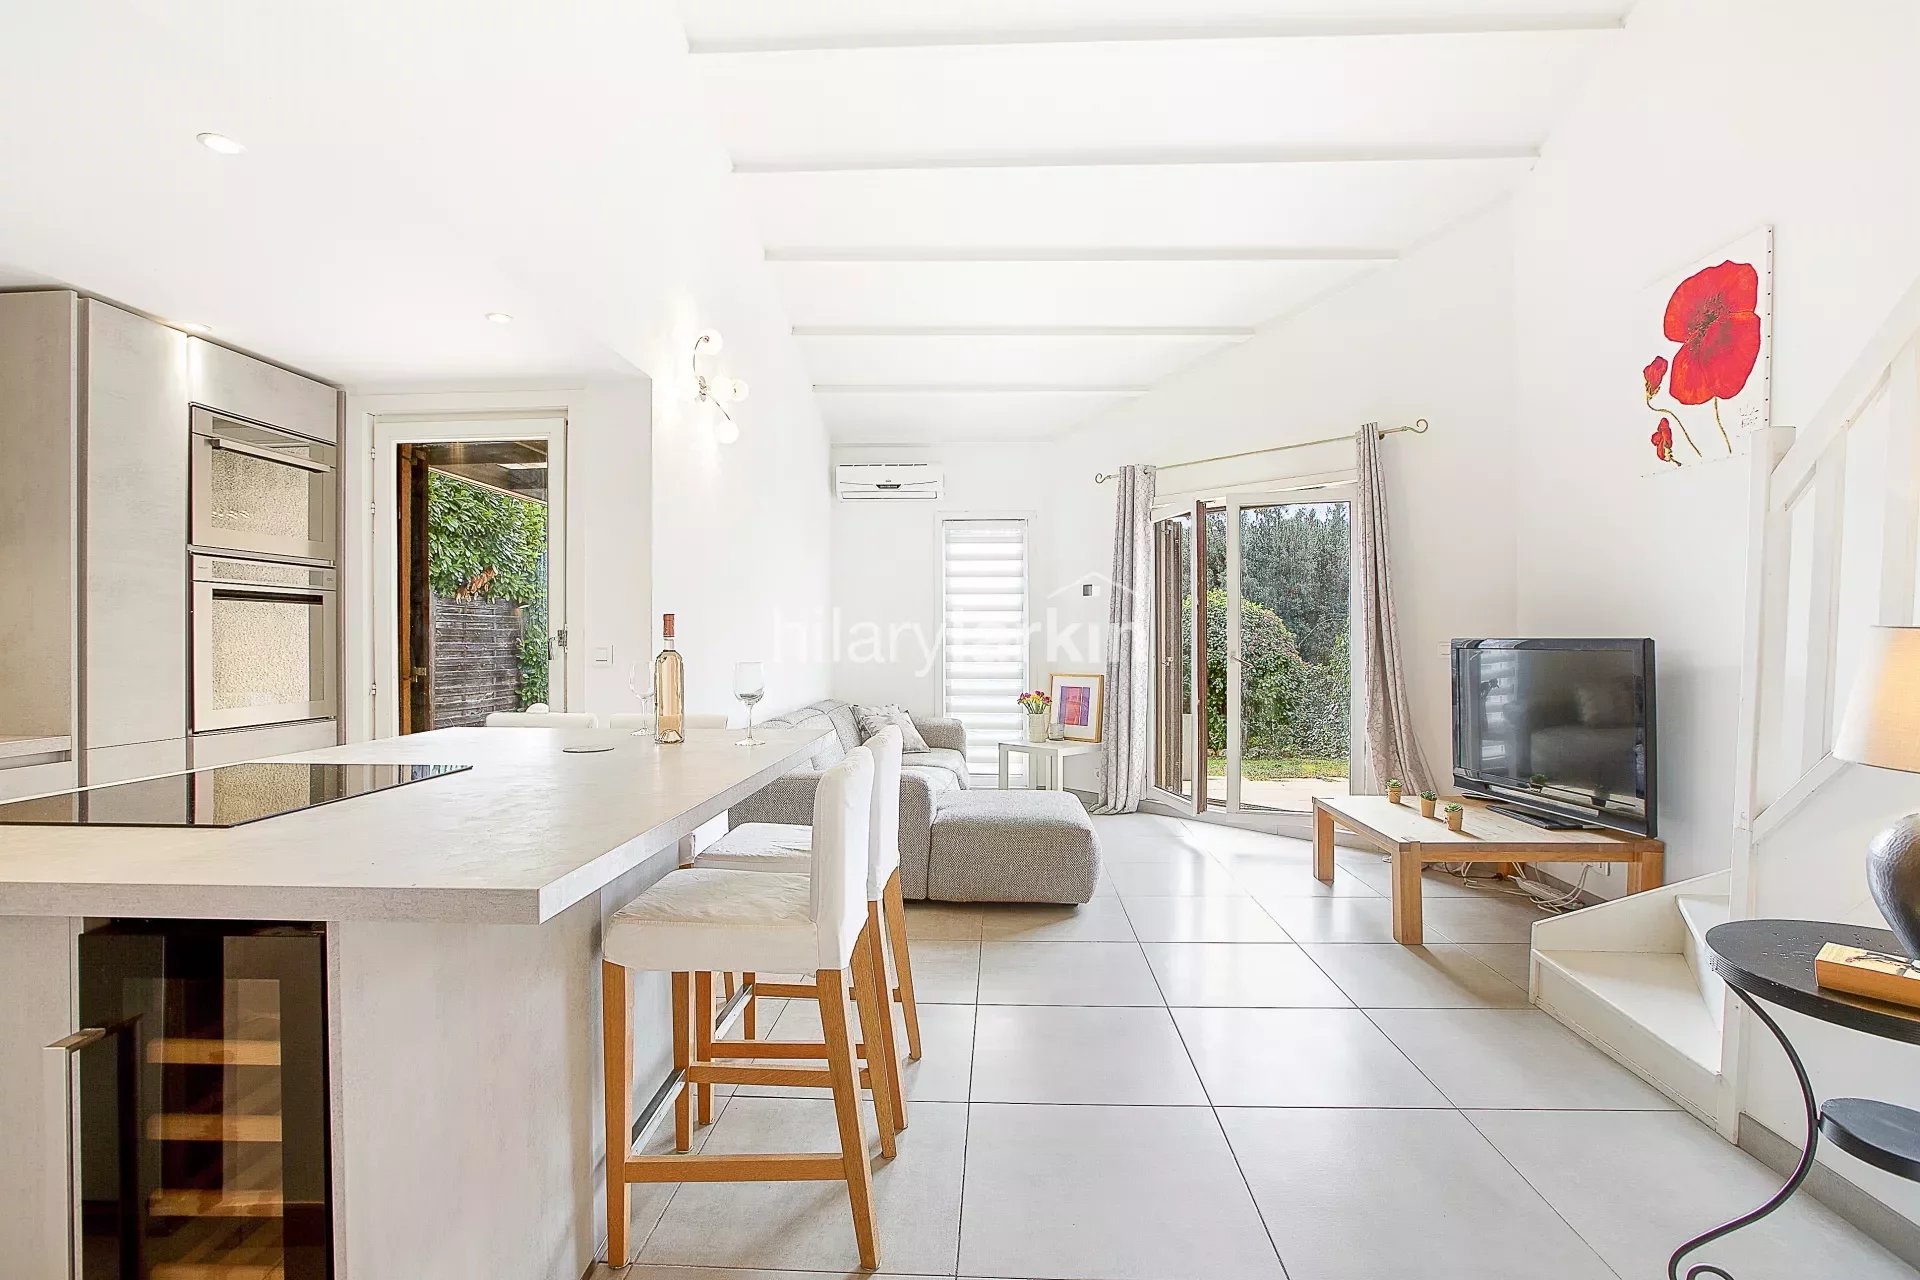 Valbonne : renovated sunny 4 bed villa in sought-after domaine